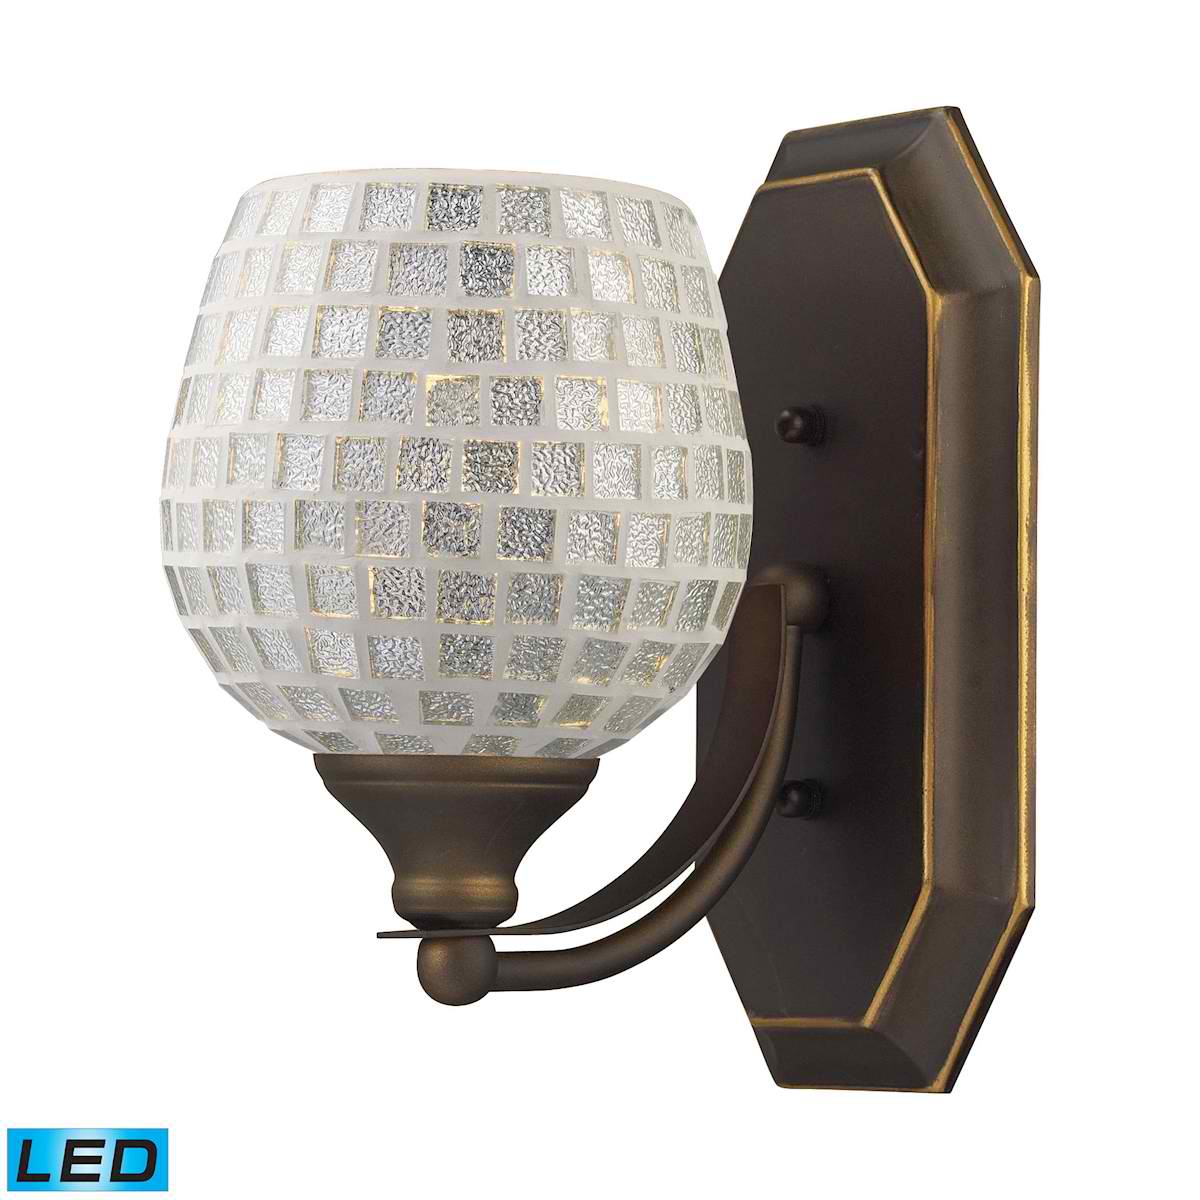 1 Light Vanity in Aged Bronze and Silver Mosaic Glass - LED Offering Up To 800 Lumens (60 Watt Equivalent)